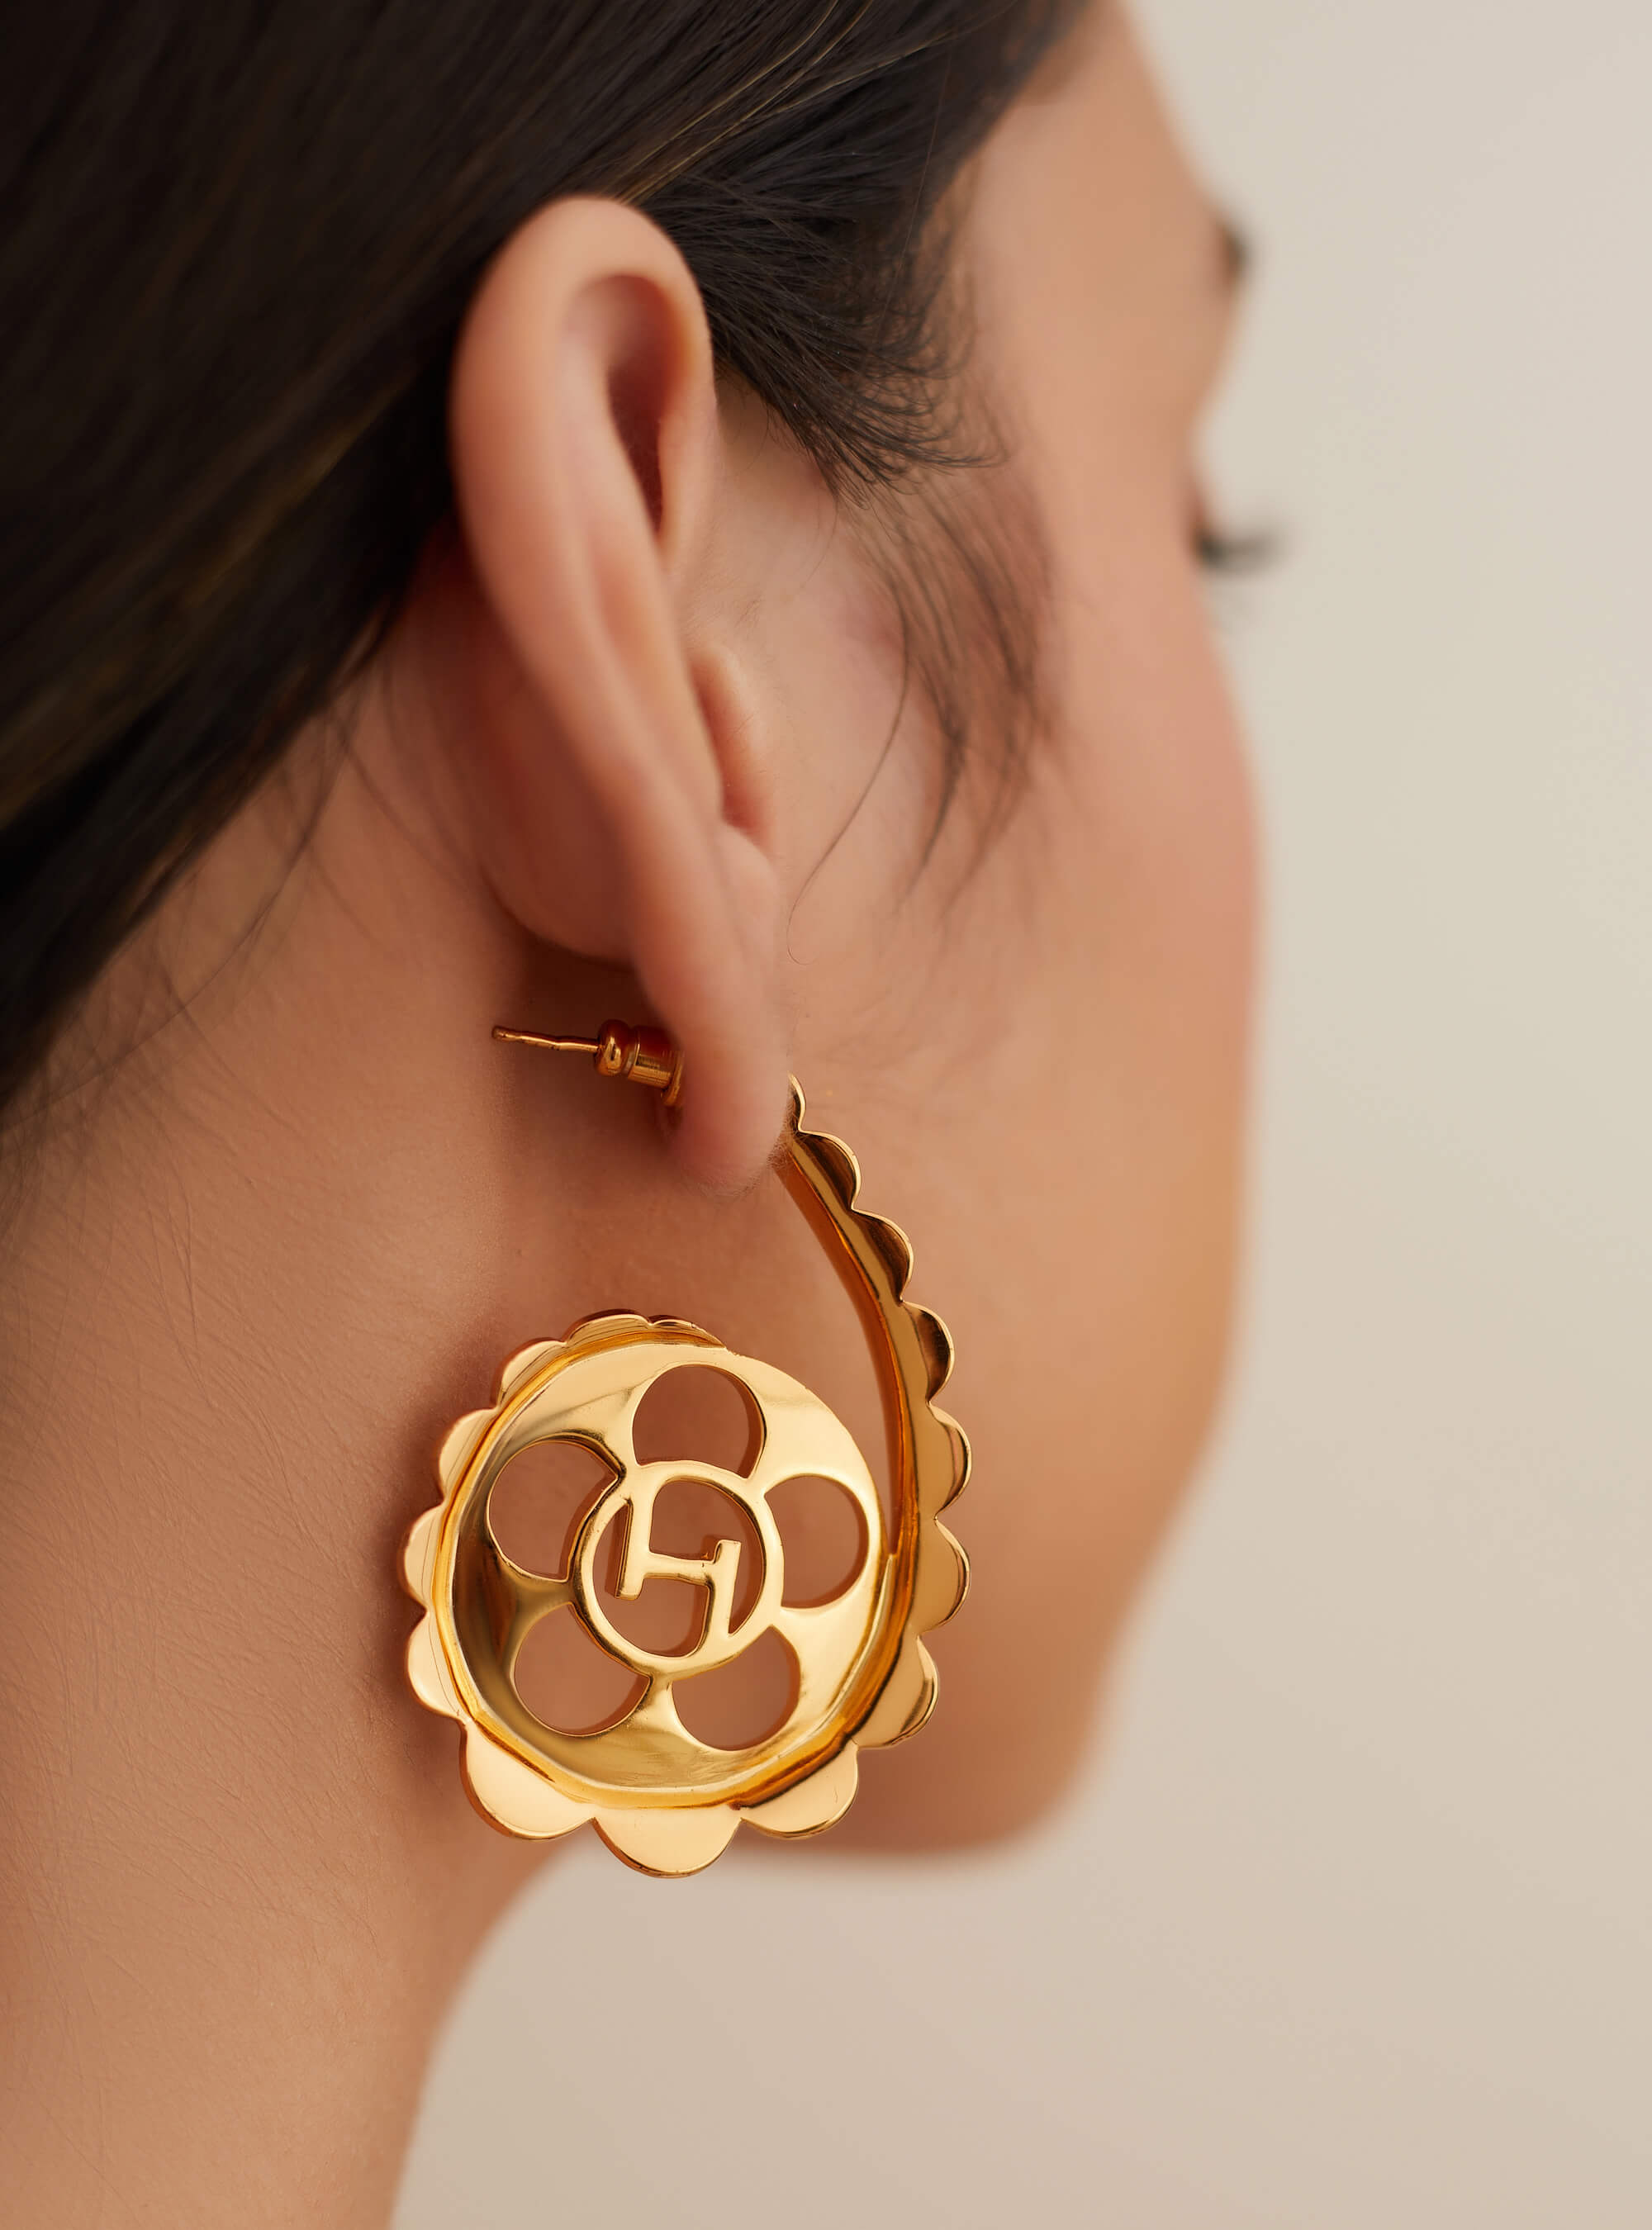 Earbells-exquisite paper jewellery collection